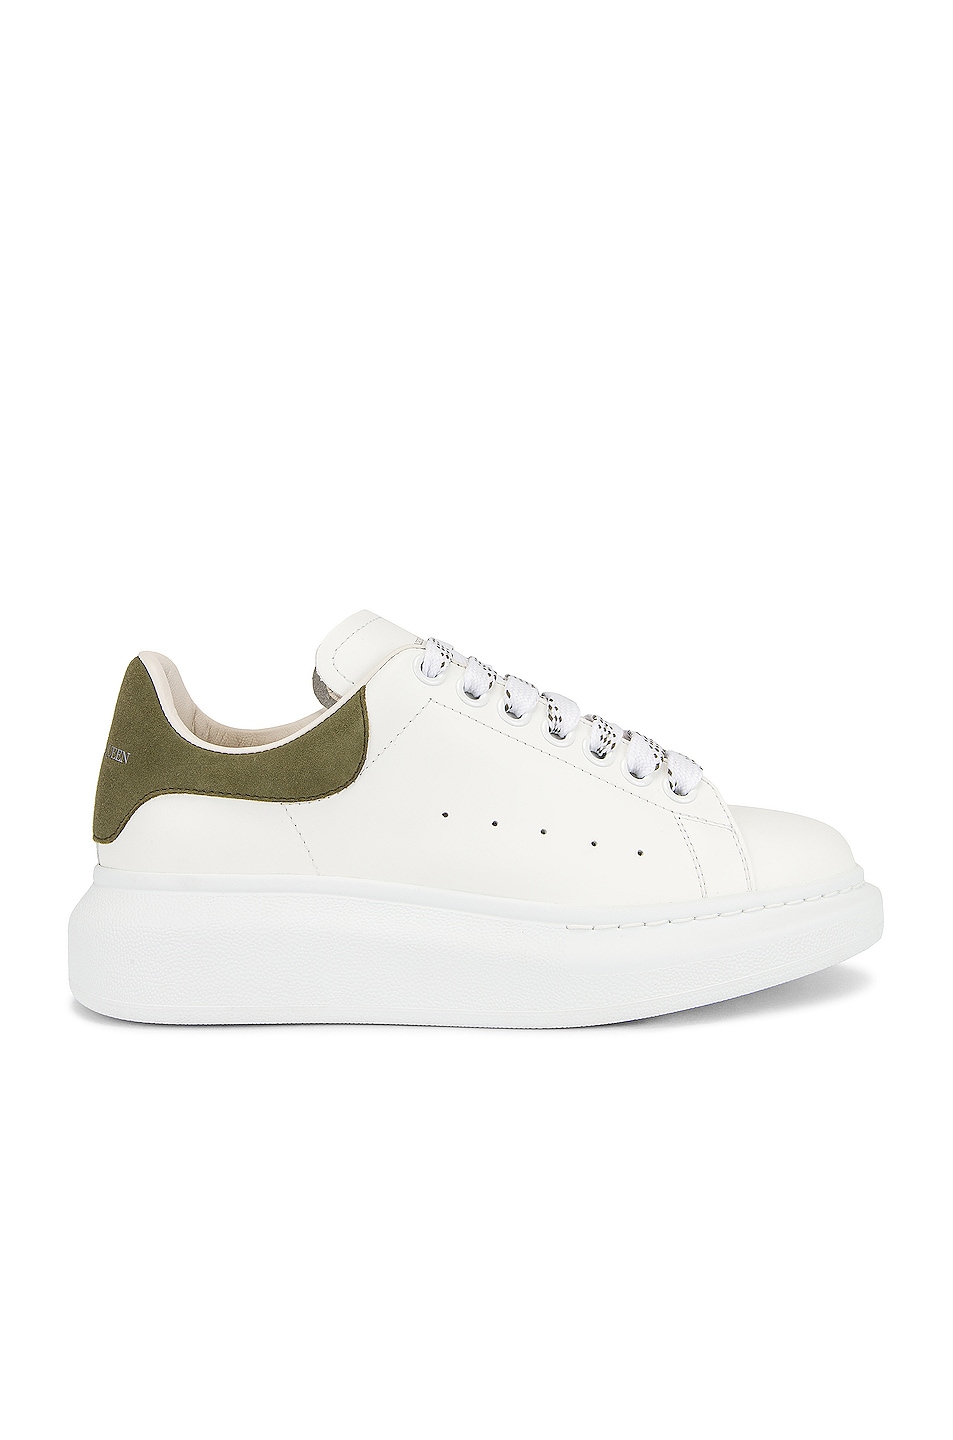 Image 1 of Alexander McQueen Leather Sneakers in White & Khaki